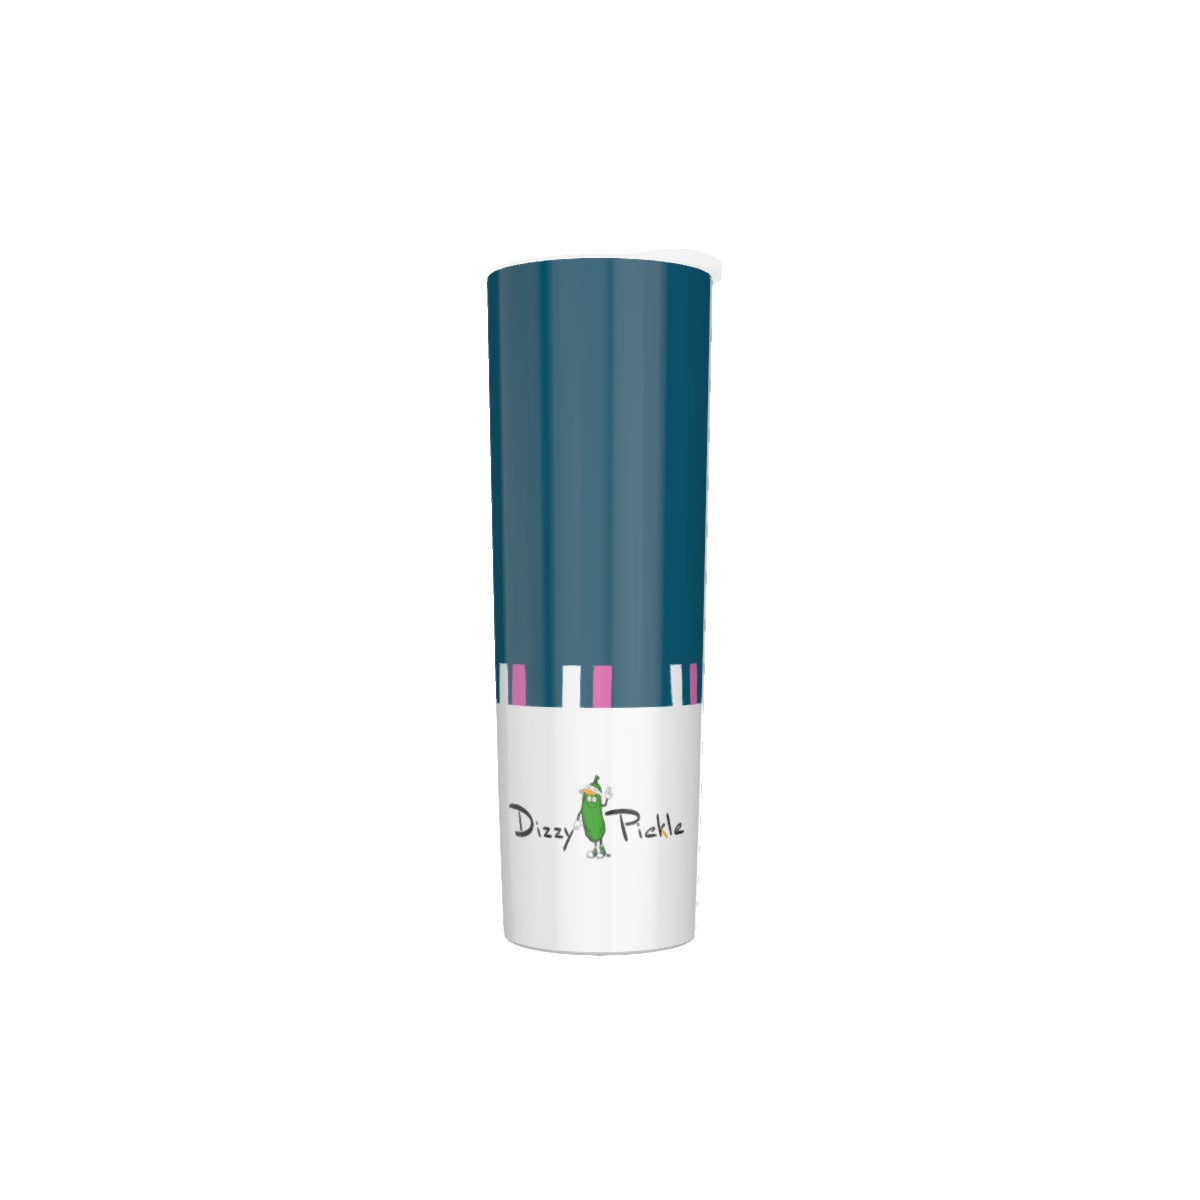 Dizzy Pickle Love at First Serve - Teal/Pink - Skinny Tumbler Stainless Steel with Lids 30oz